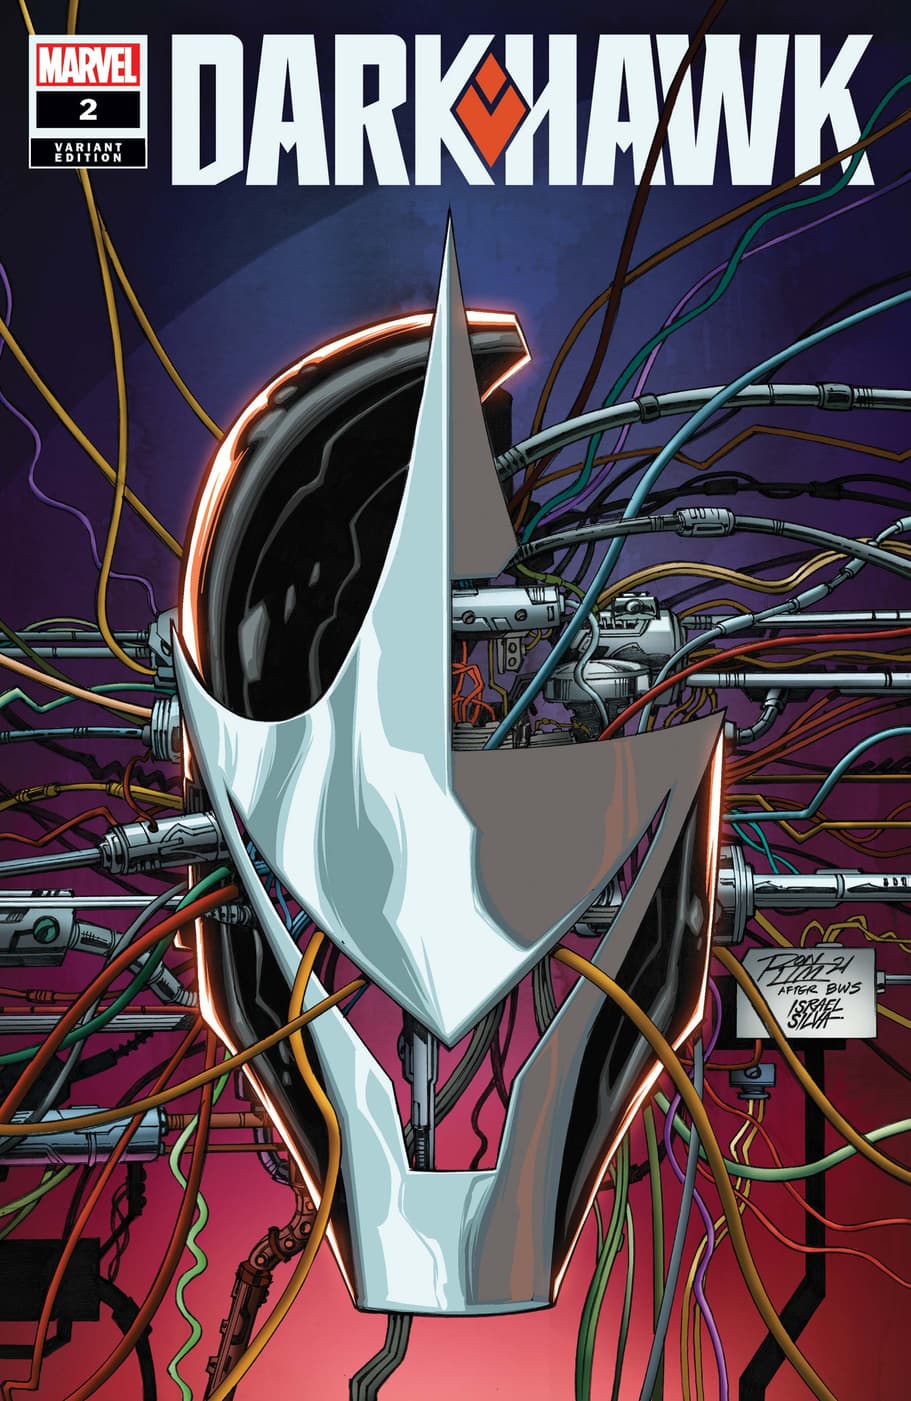 DARKHAWK #2 variant cover by Ron Lim and Israel Silva